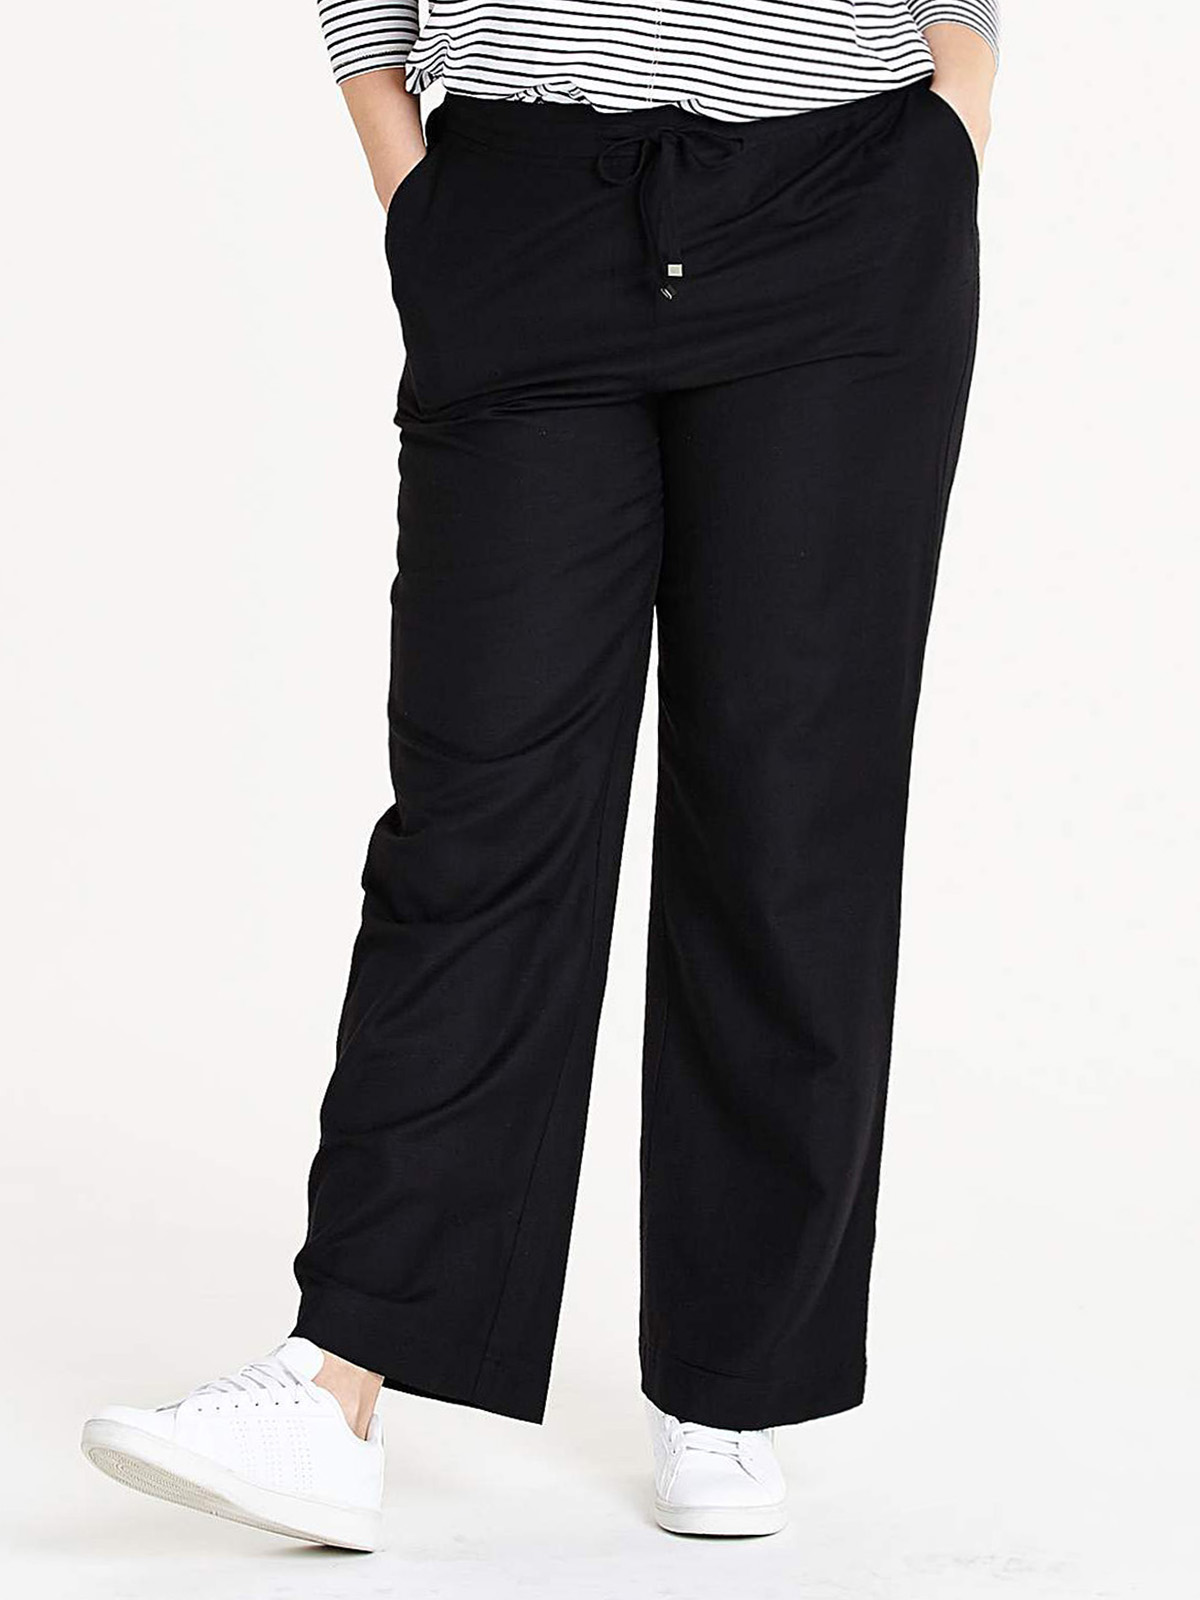 Capsule - - BLACK Linen Blend Easy Care Trousers - Plus Size 14 to 24